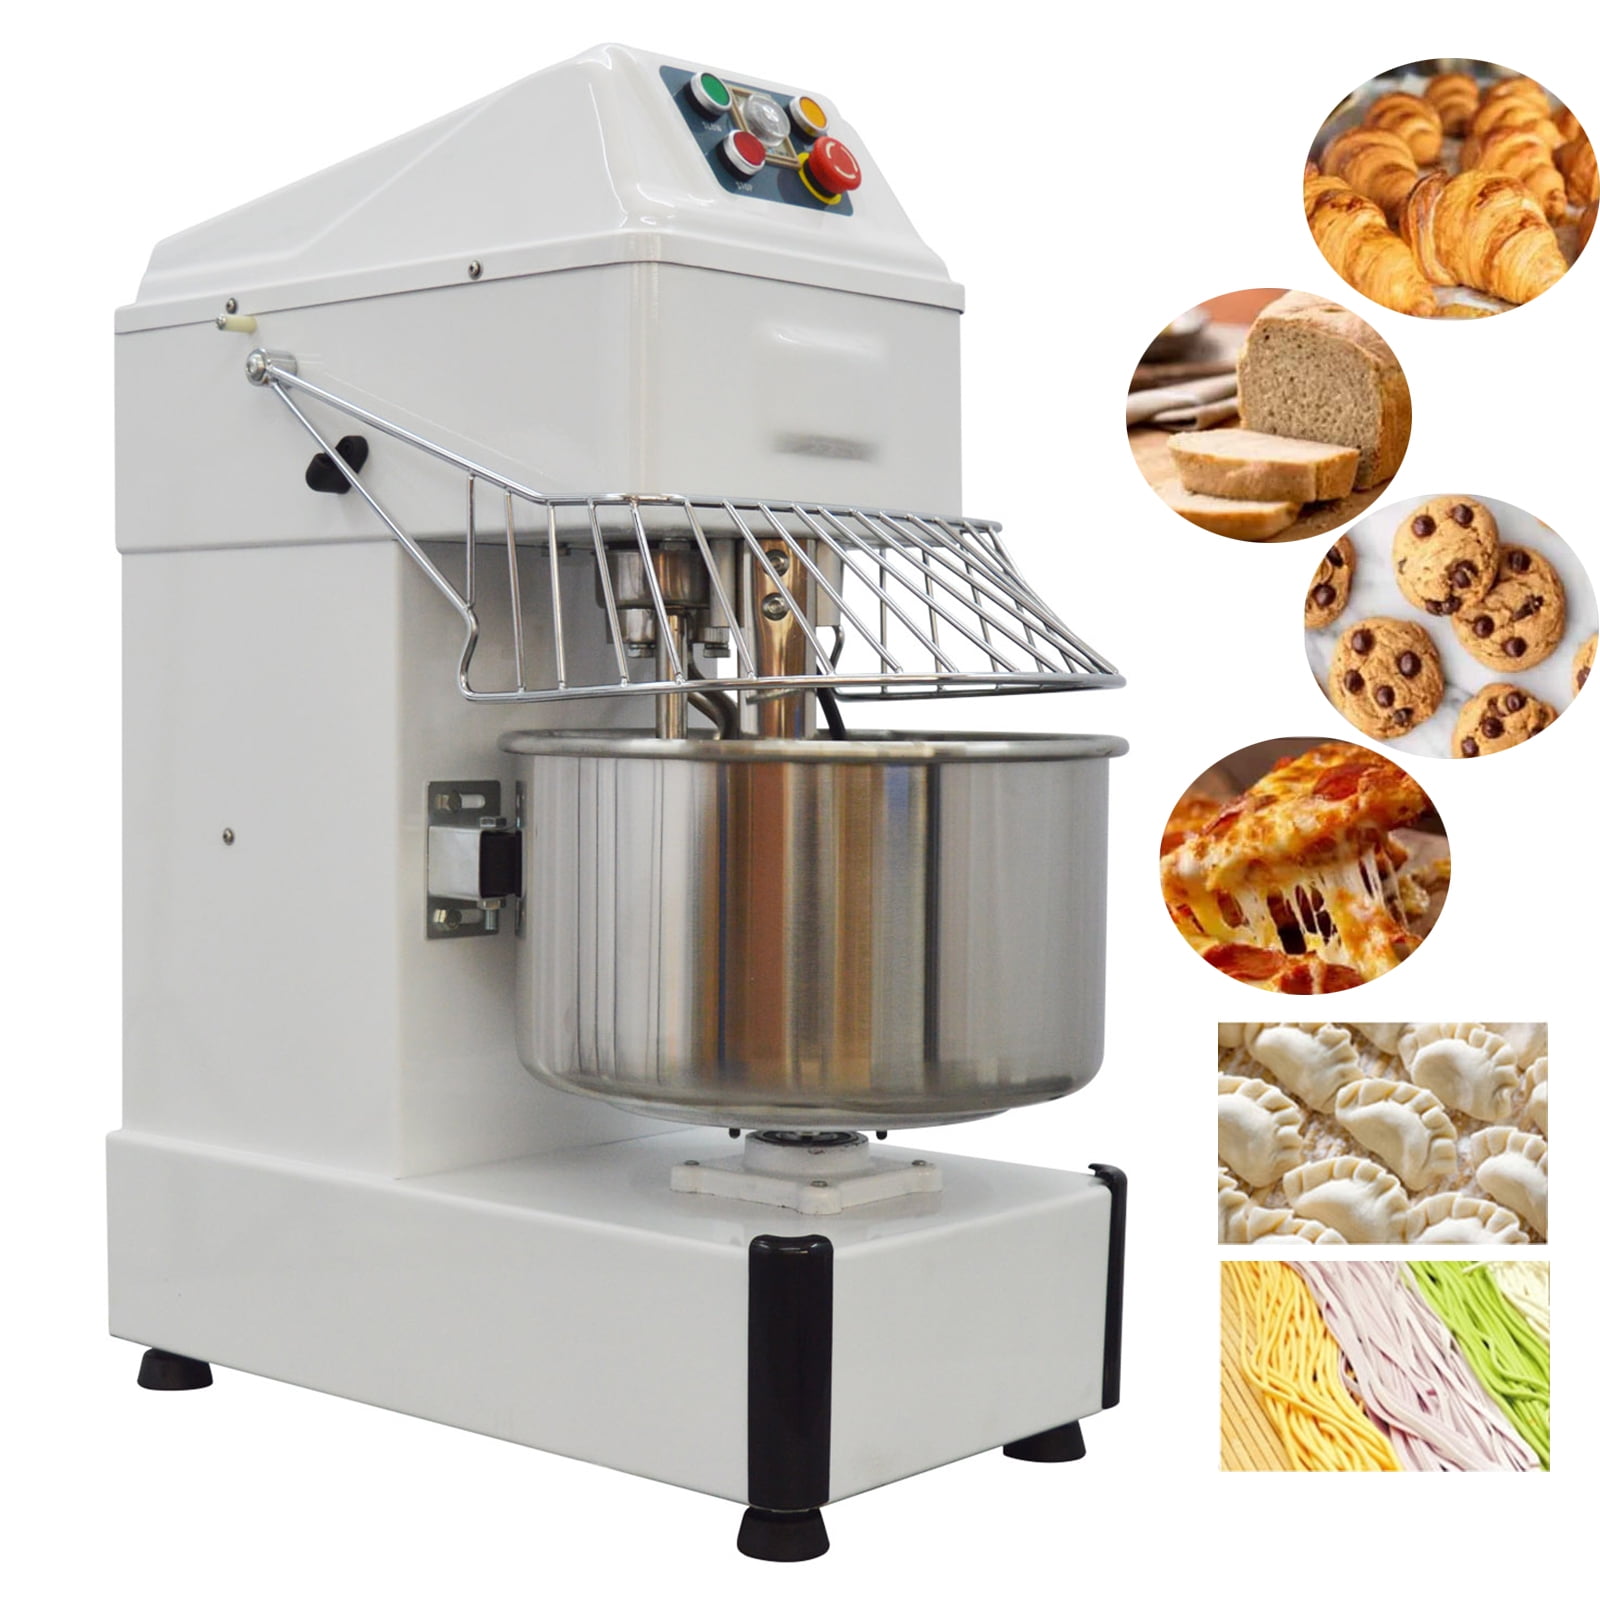 Intbuying 30qt Dough Mixer Double Action Spiral Stand Mixer Electric Stainless Steel Dough Blender Pizza Flour Mixing Machine with 2 Adjustable